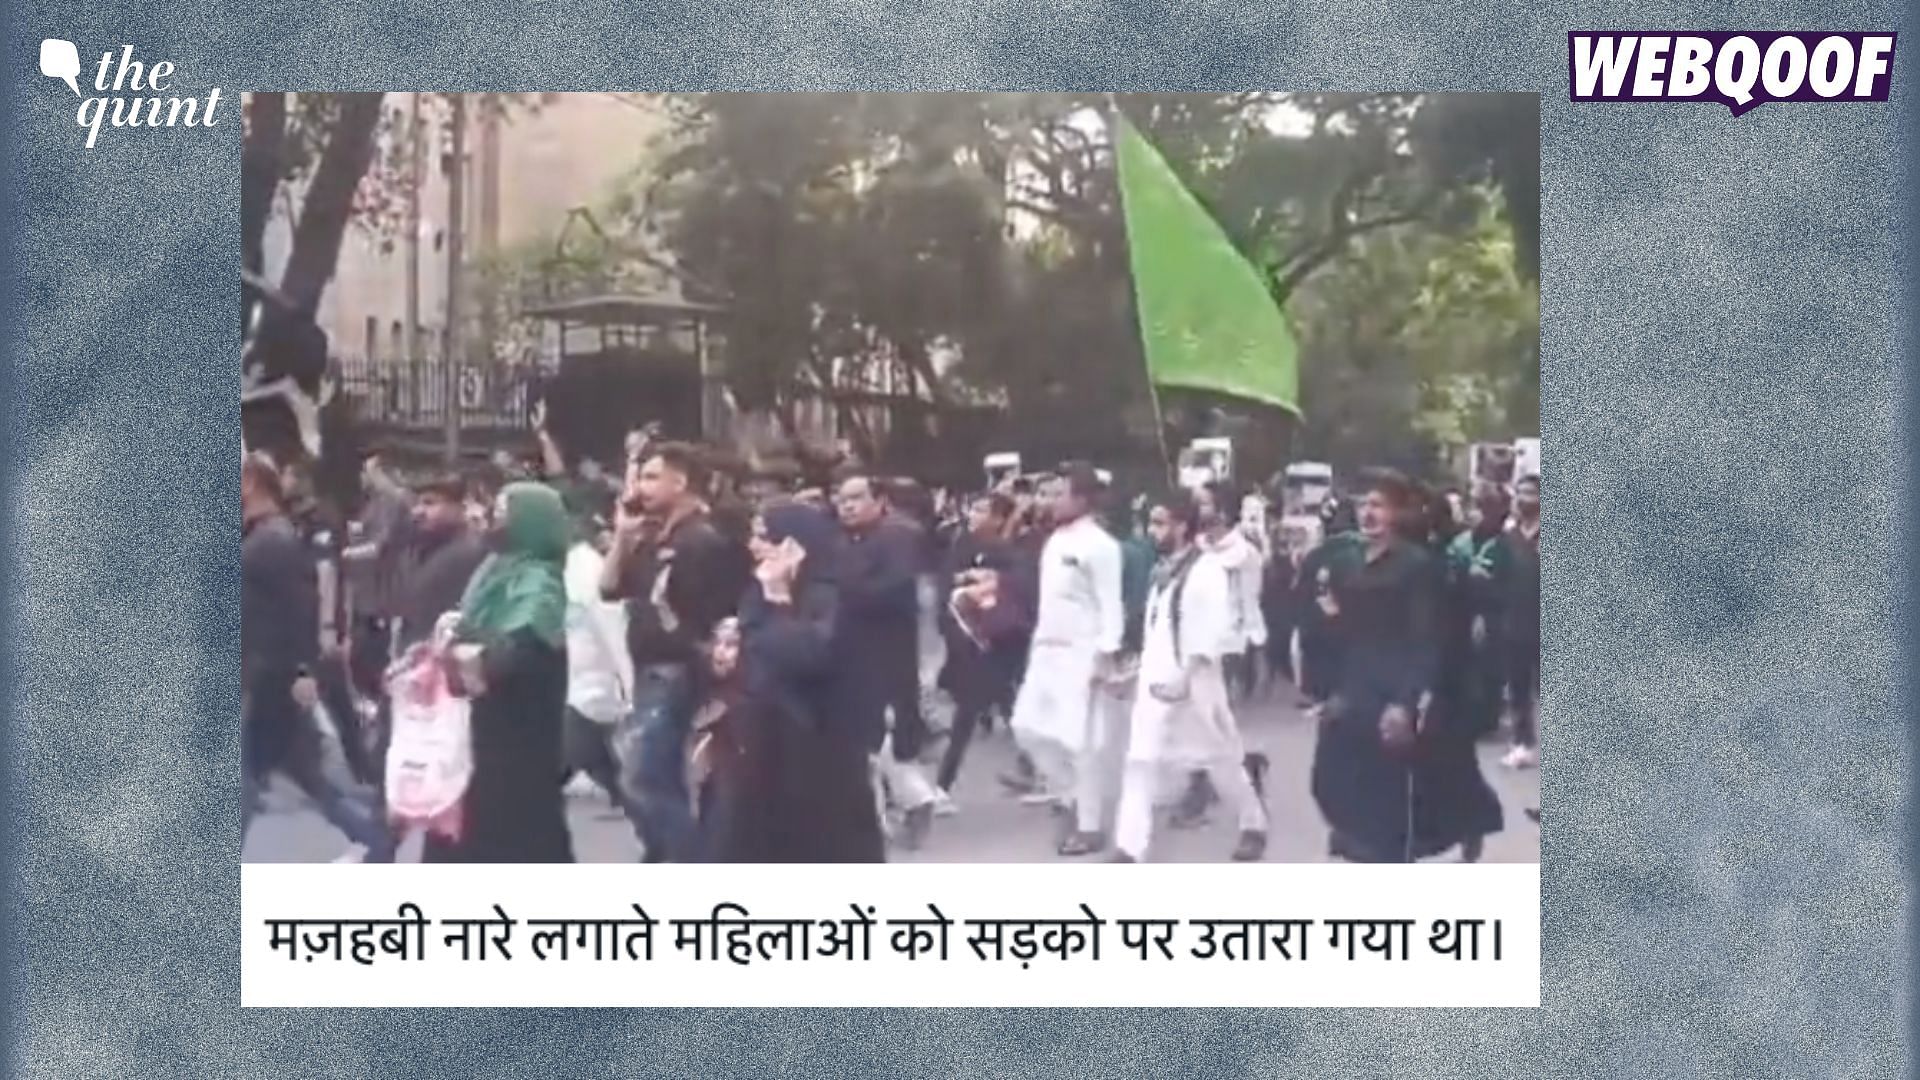 <div class="paragraphs"><p>Fact-Check: This video does not show a communal protest by the Muslims in Delhi.&nbsp;</p></div>